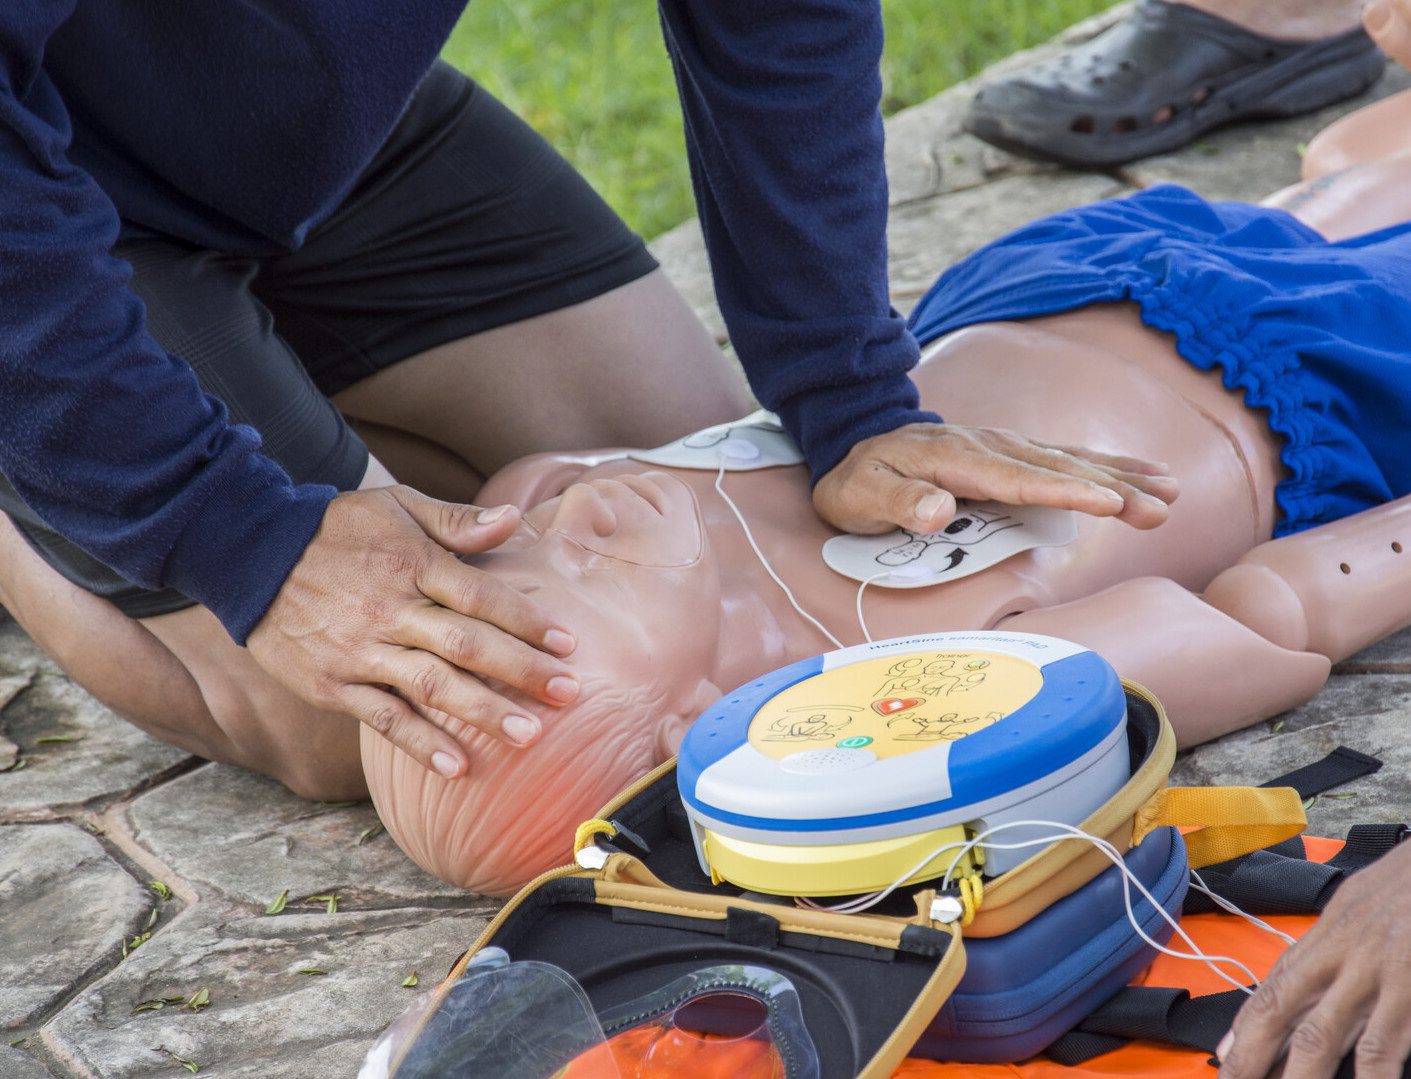 ‘LONDON LIFESAVERS’ CAMPAIGN TO GET MORE LONDONERS ON BOARD